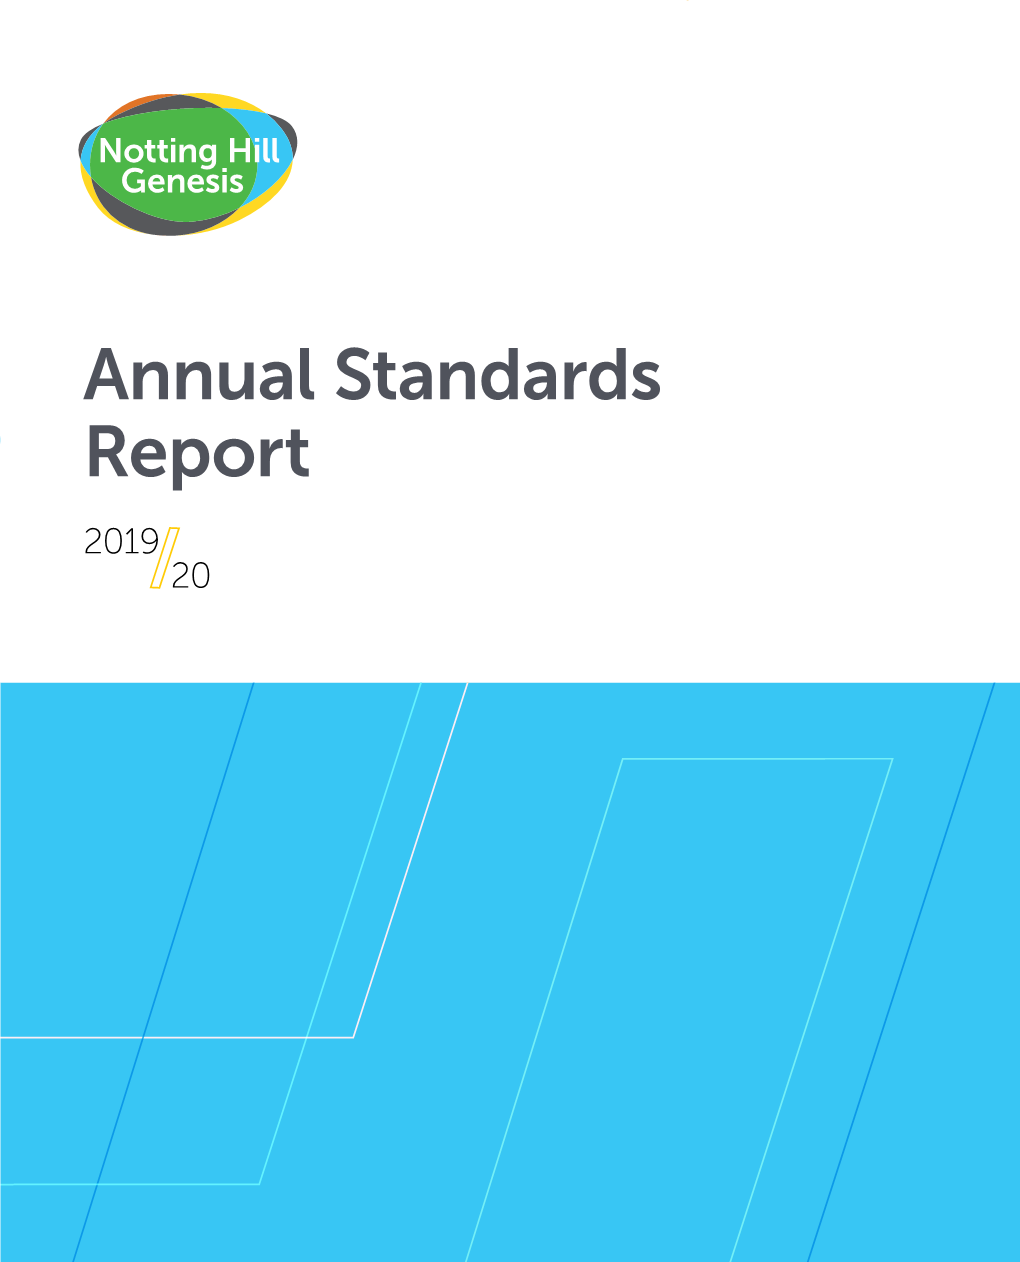 Notting Hill Genesis Annual Standards Report 2020